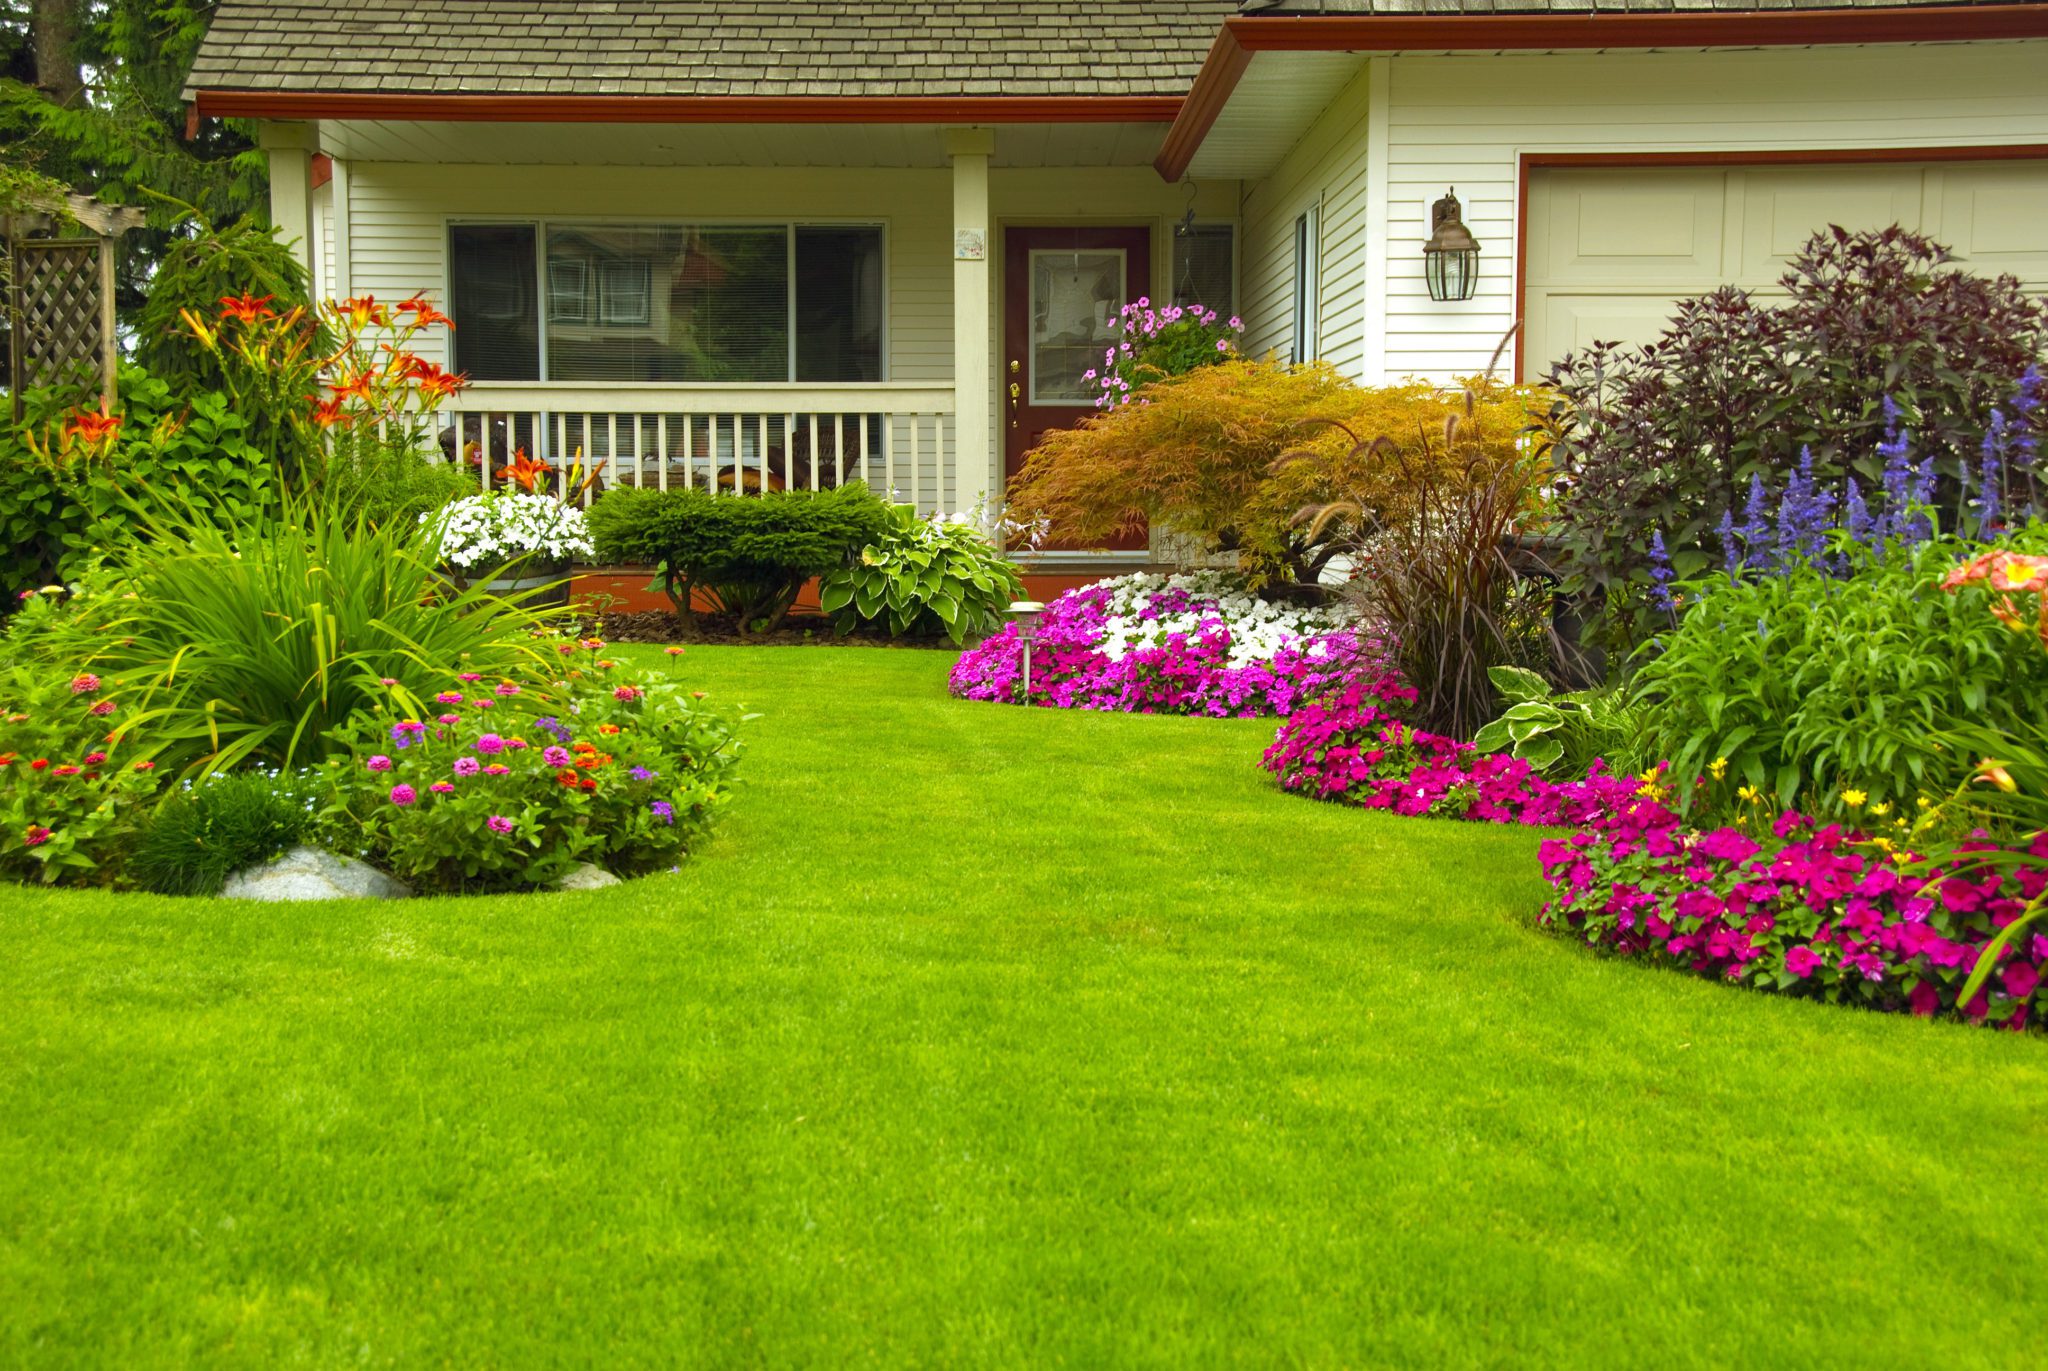 5 Simple Tips to Boost the Curb Appeal of Your Home